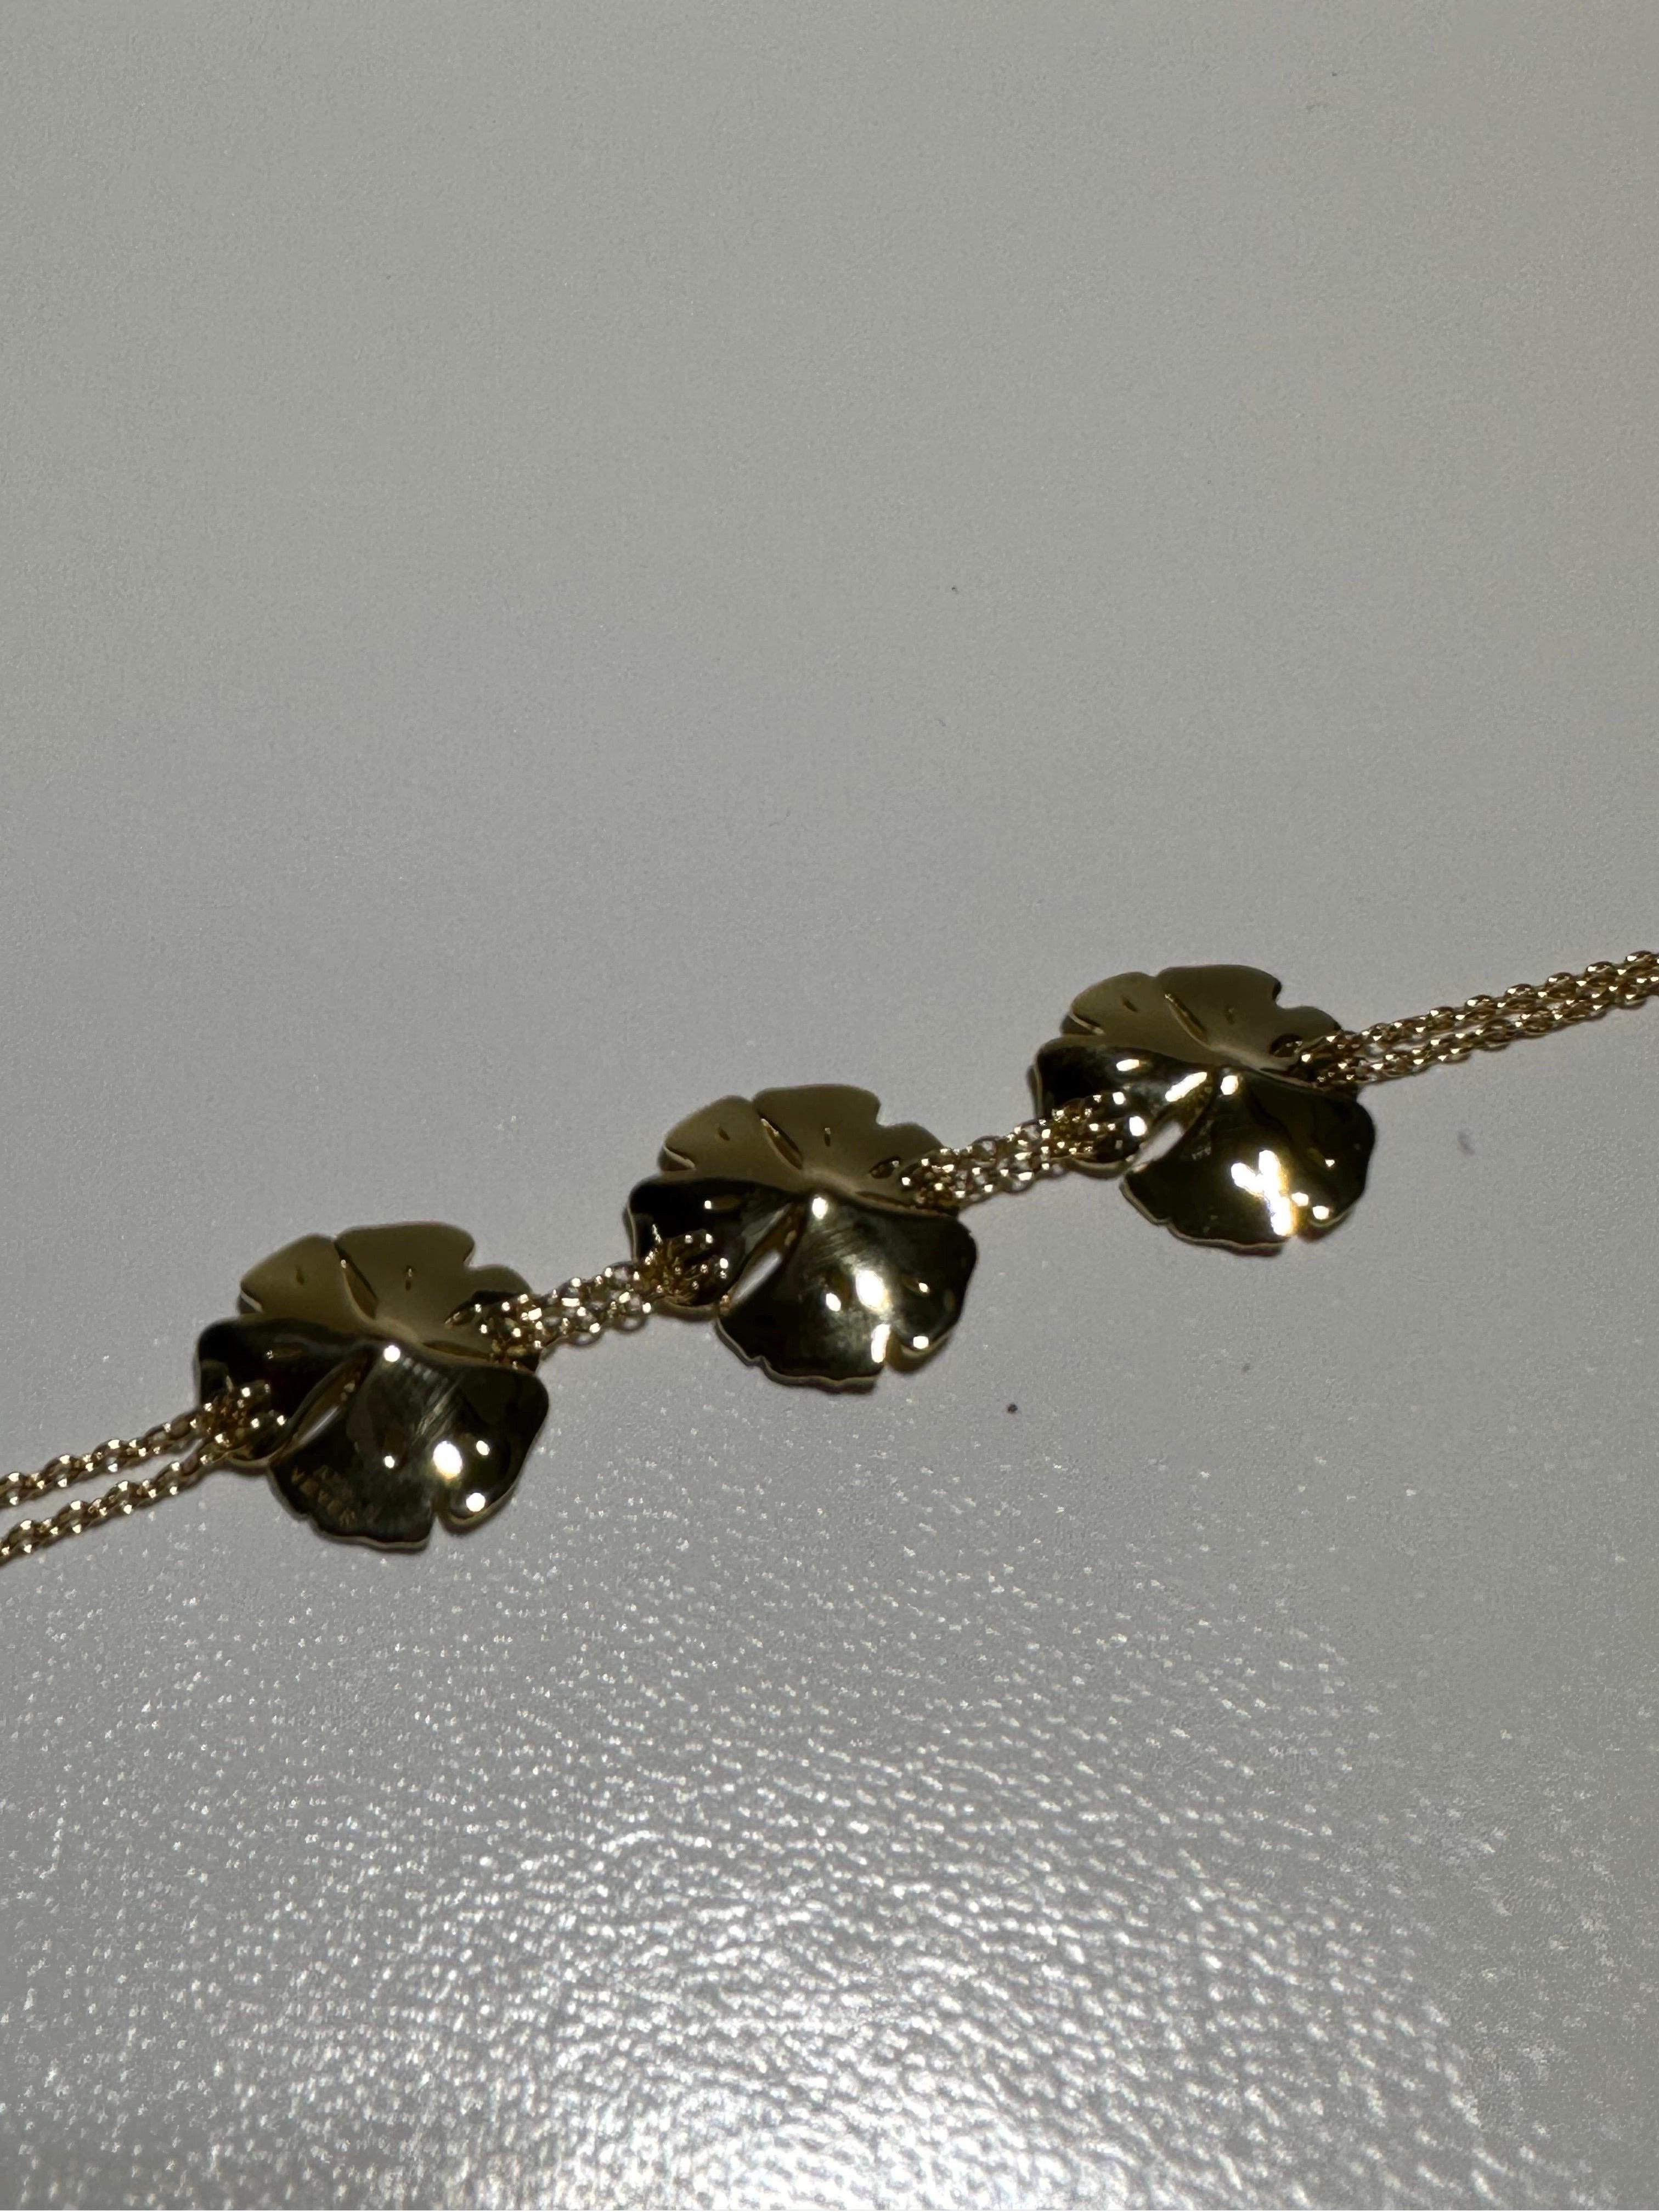 Brand new bracelet made by the French jewelry house Vever. The bracelet is made of 18 kt yellowgold and has 6 labgrown diamonds (0.26 ct). 

The starts in 1821 in Metz, France, when Pierre-Paul Vever opens his first silversmith & jewelry workshop.